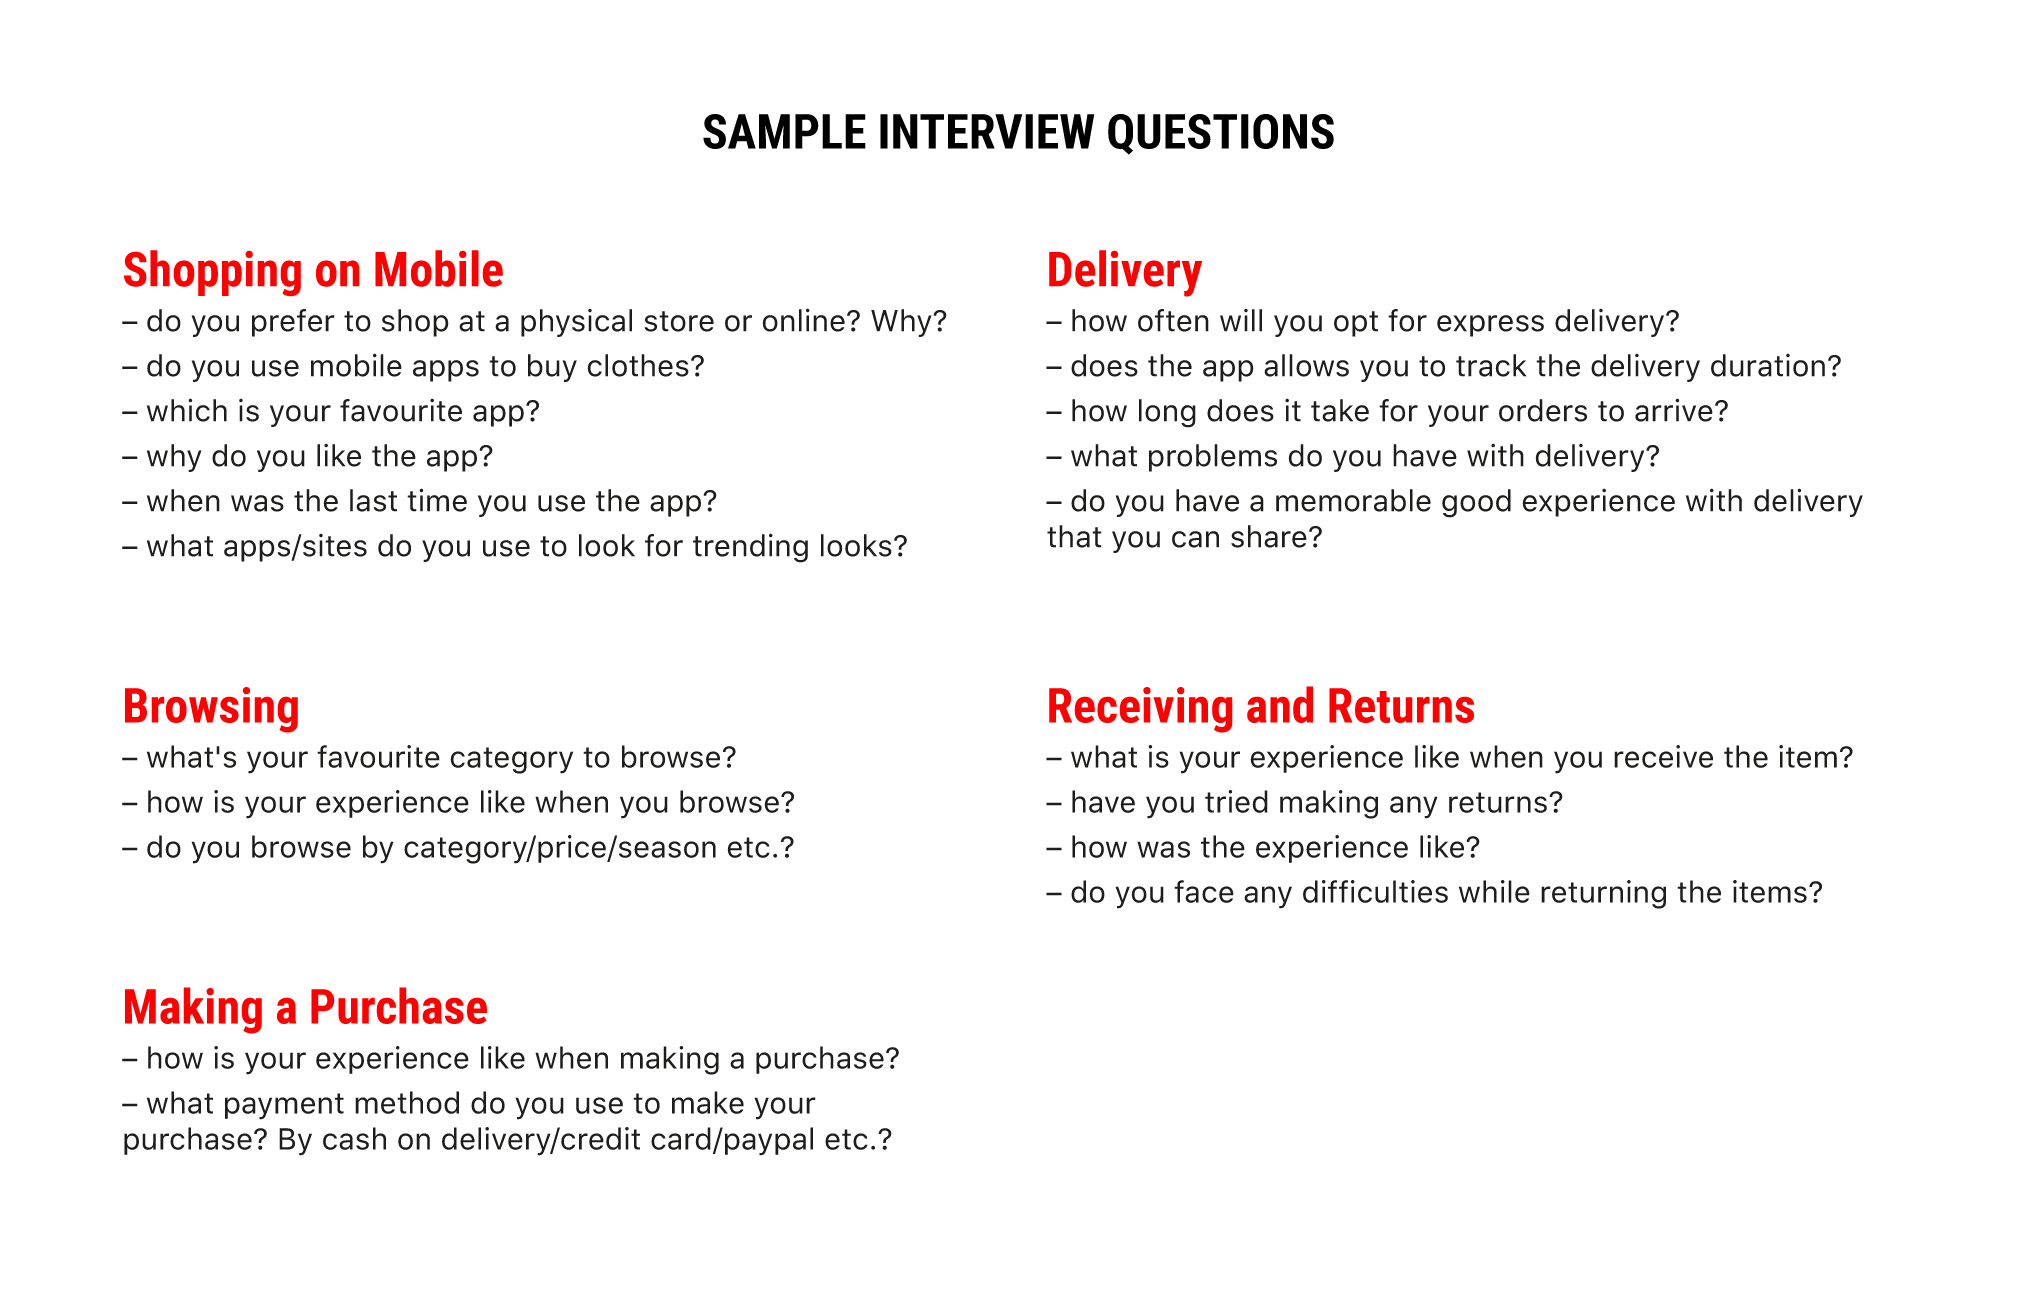 Uniqlo Self-Checkout Mobile App Redesign - Sample Interview Questions - Leowhouteng